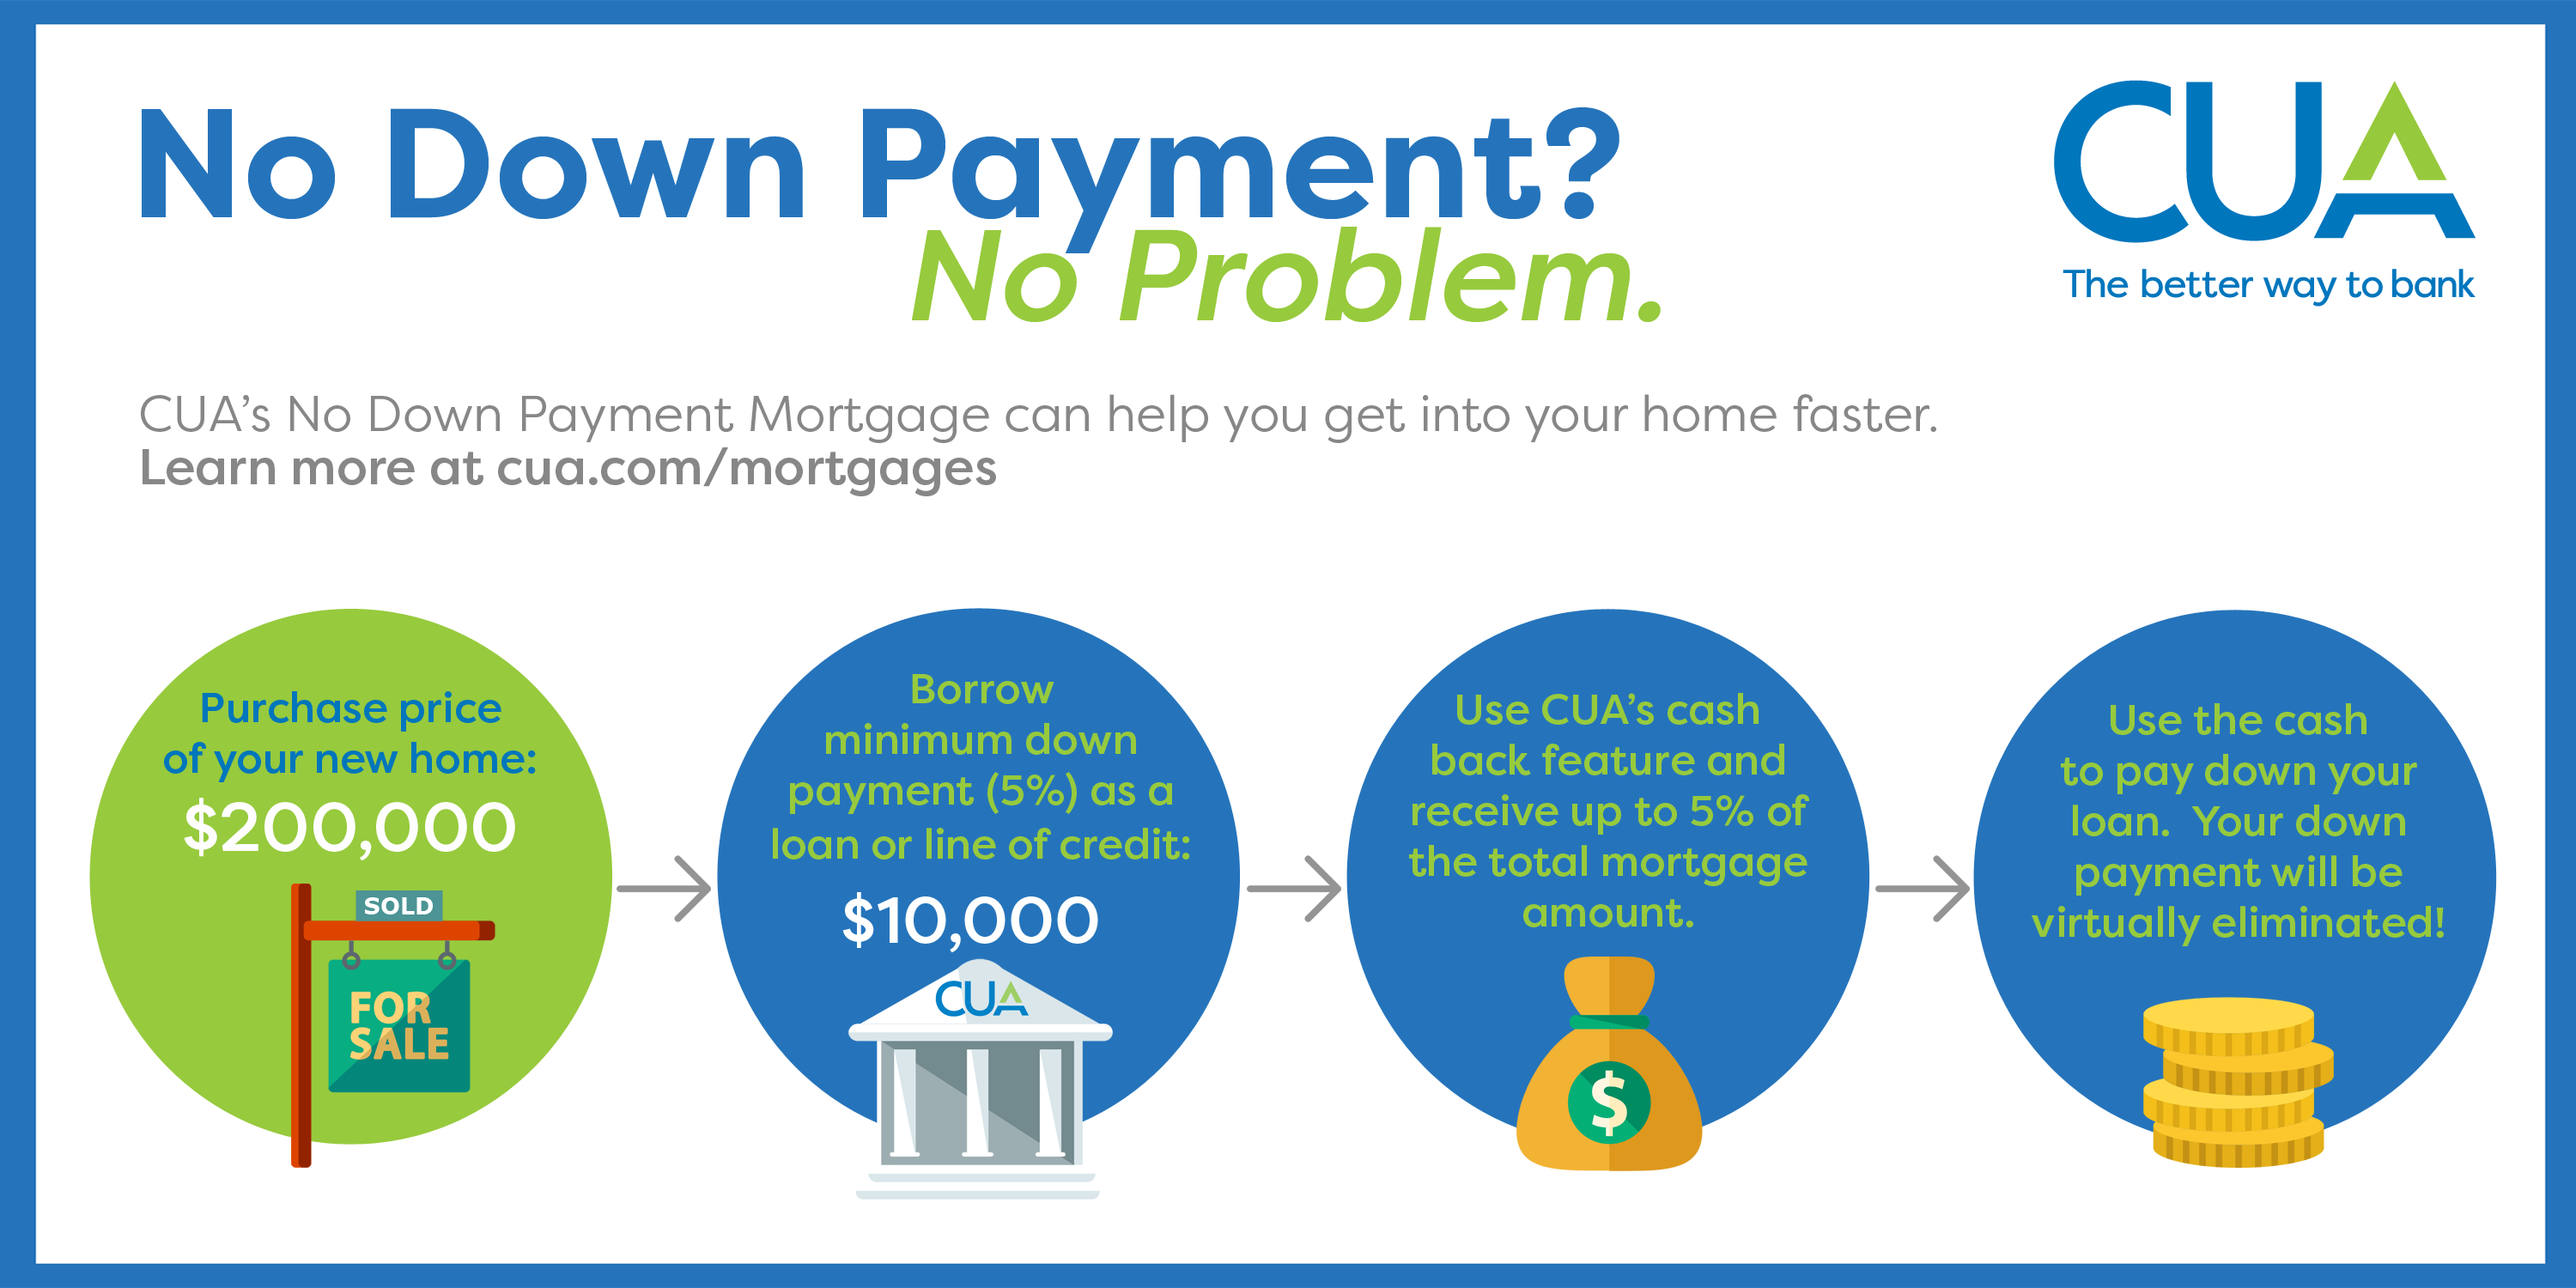 Down payment Mortgage. No down payment loan. Payment problems. How to buy a Home with Bad credit.